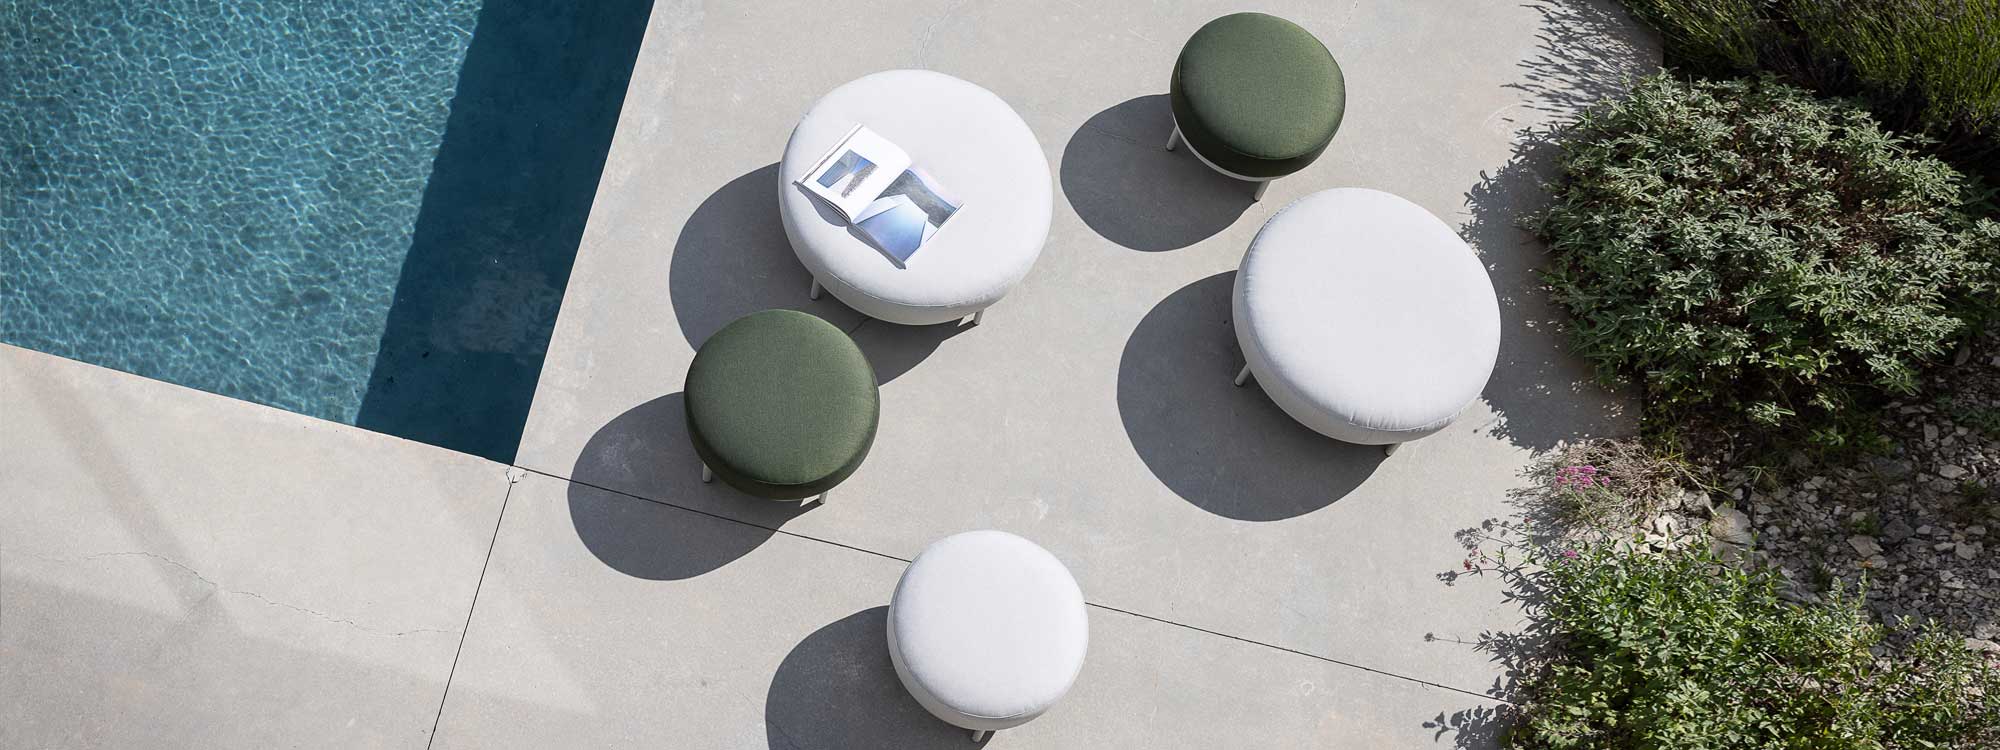 Image of aerial view of different sizes of Baza modern garden poufs with green and white cushions, on sunny poolside